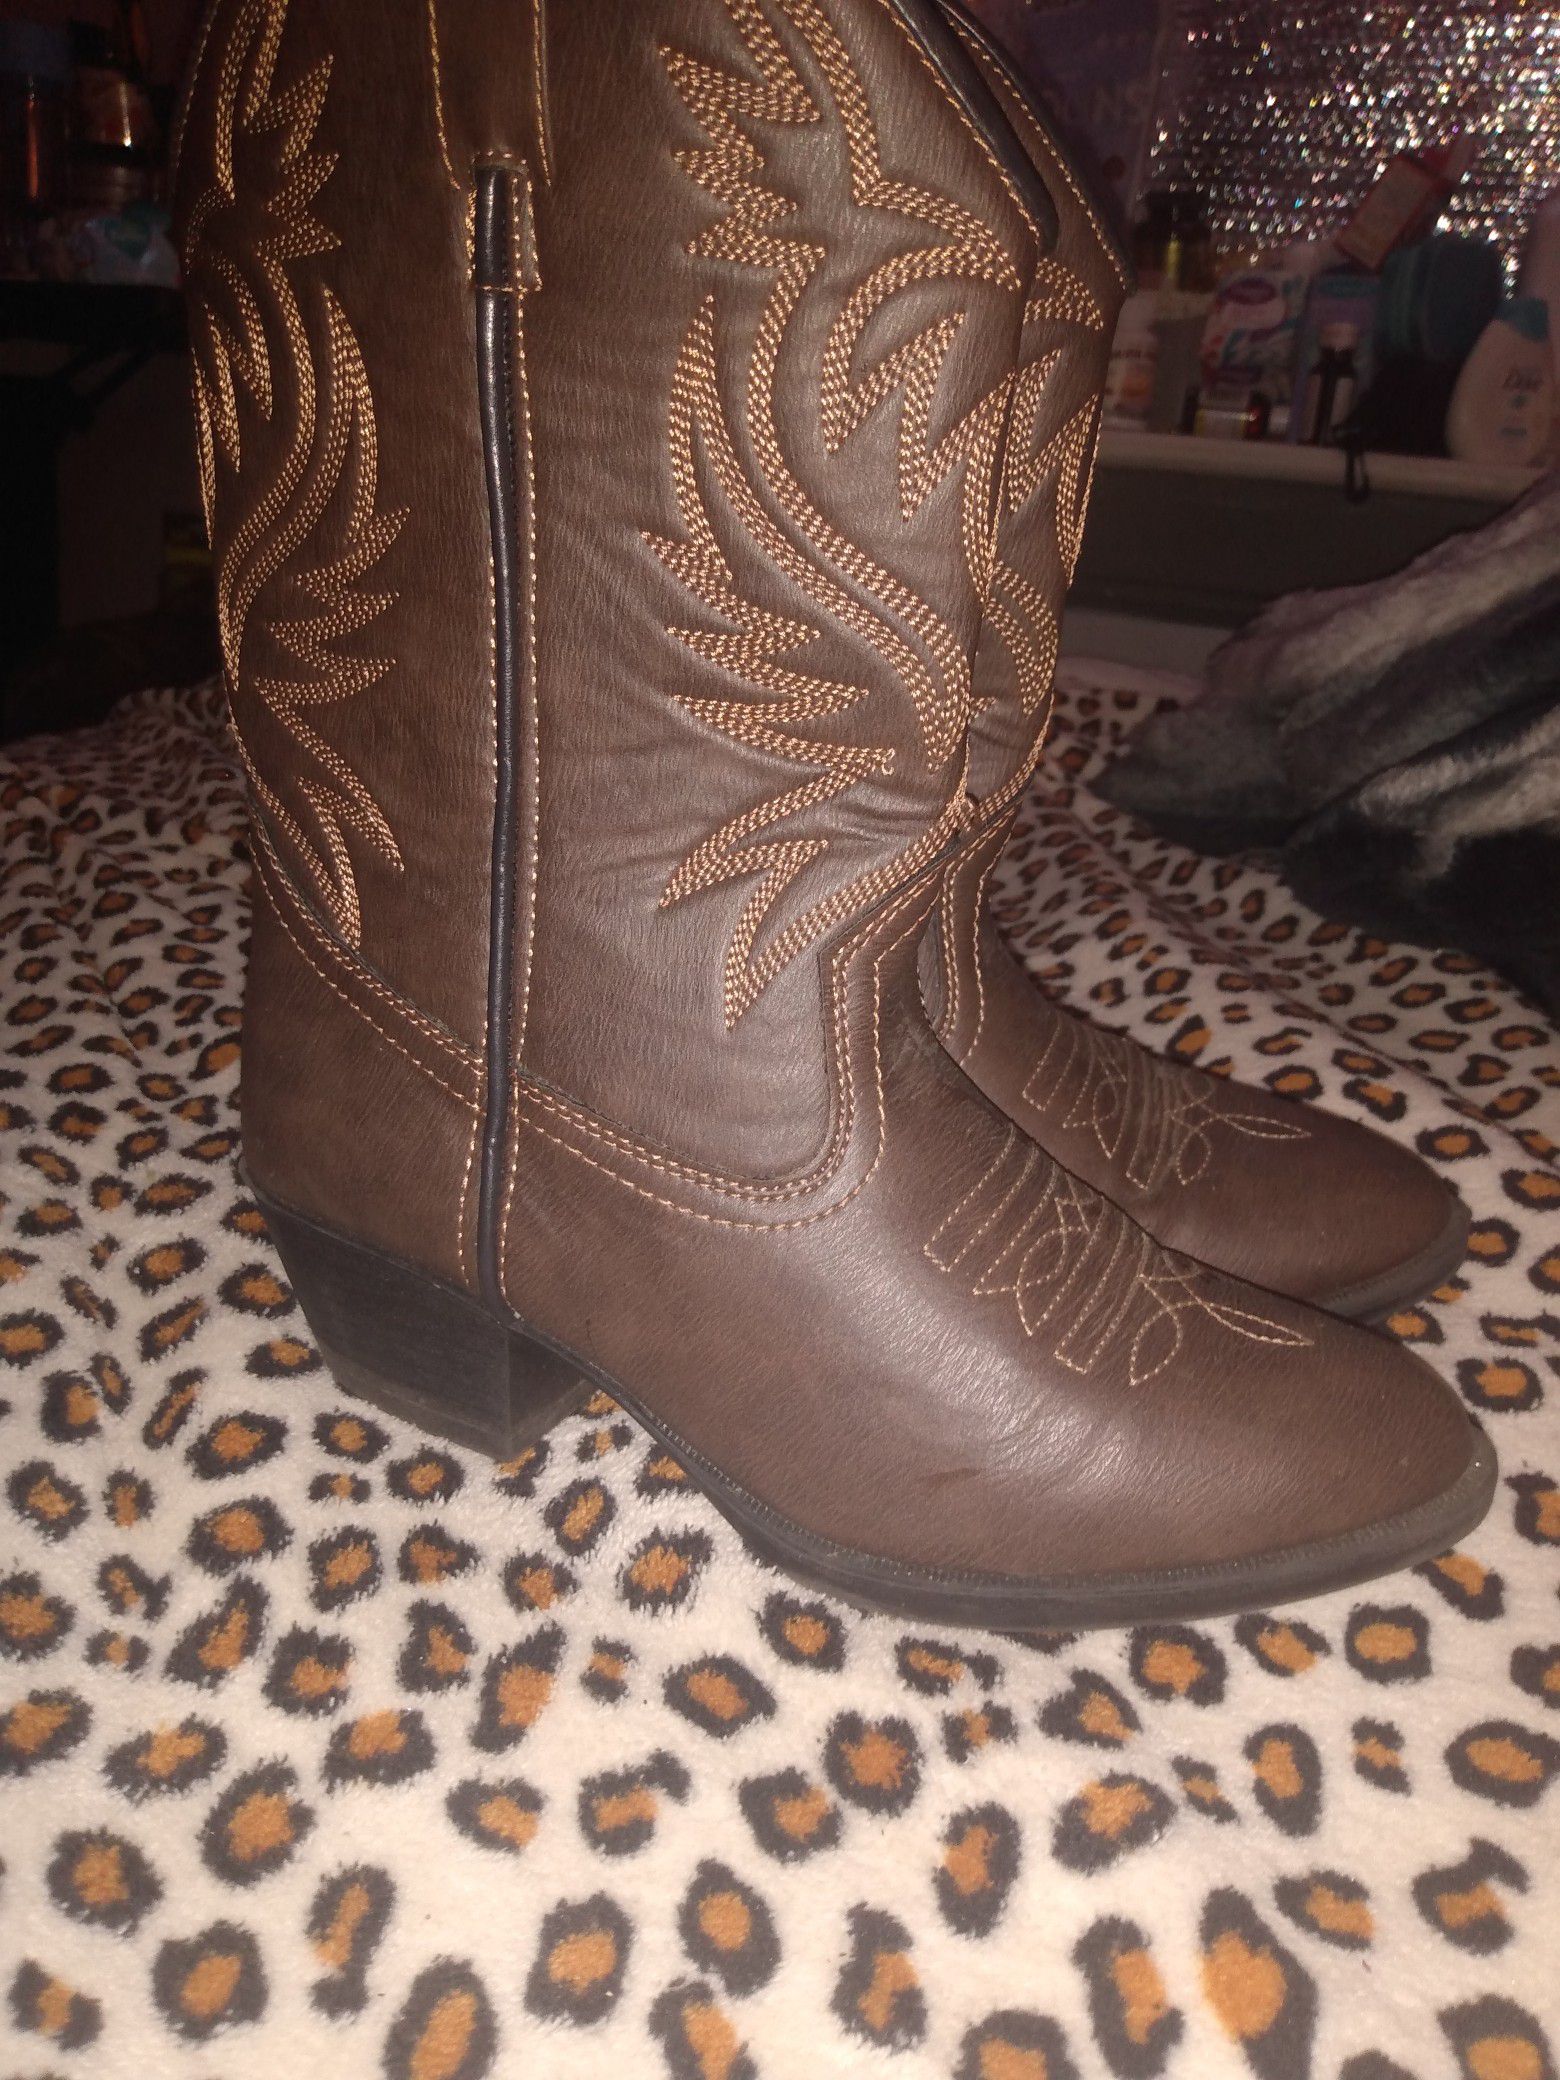 Girl boots size 5